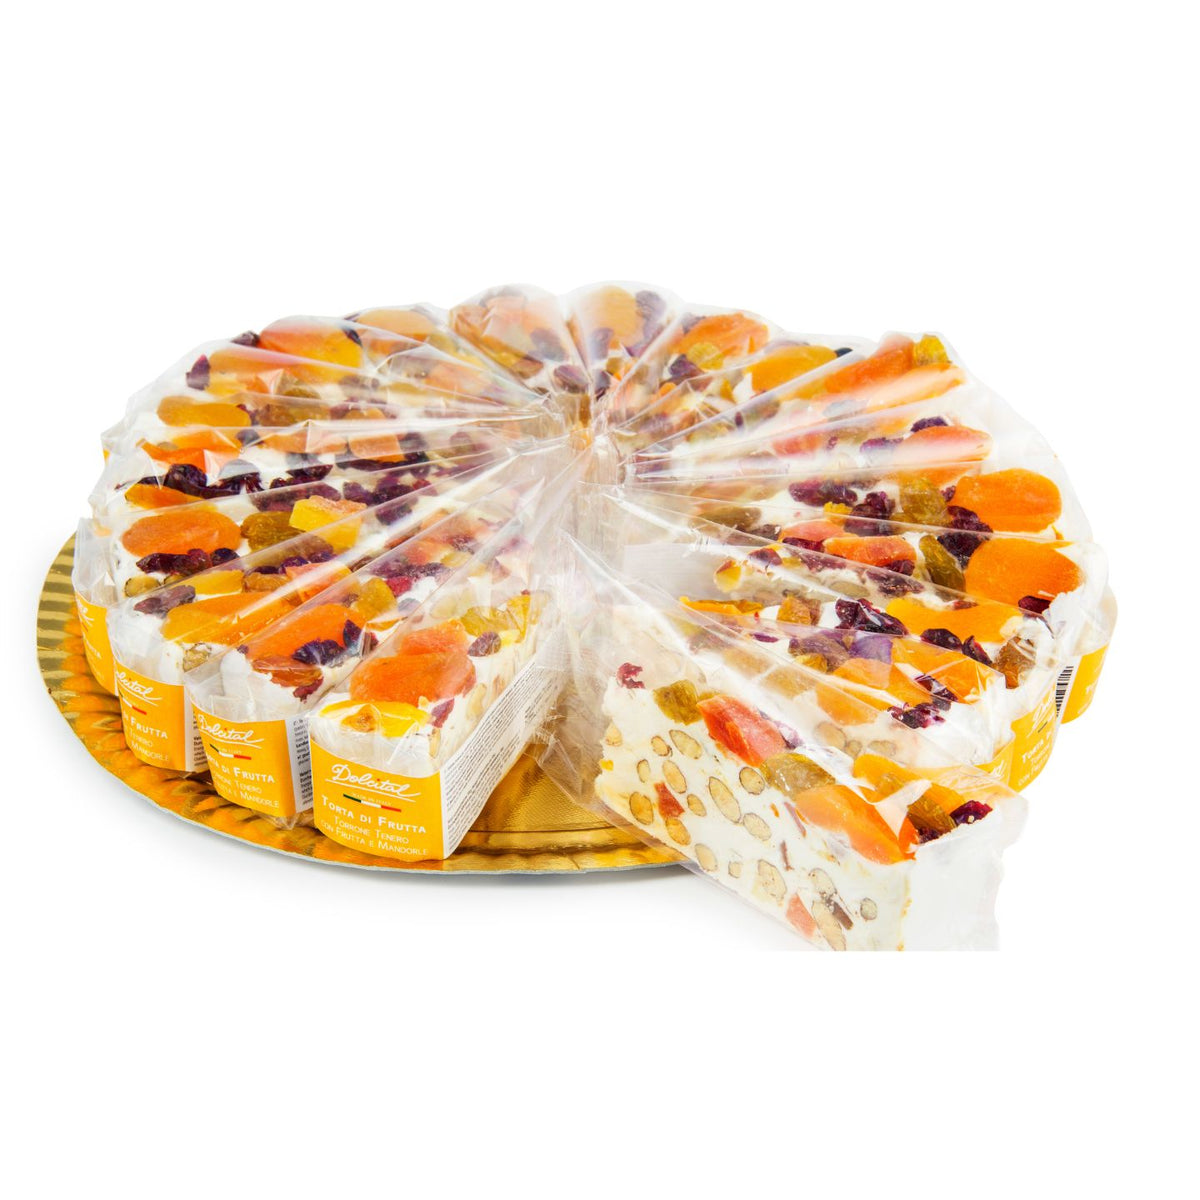 Dolcital Soft Nougat Cake with Almonds &amp; Fruit 20x110g  | Imported and distributed in the UK by Just Gourmet Foods